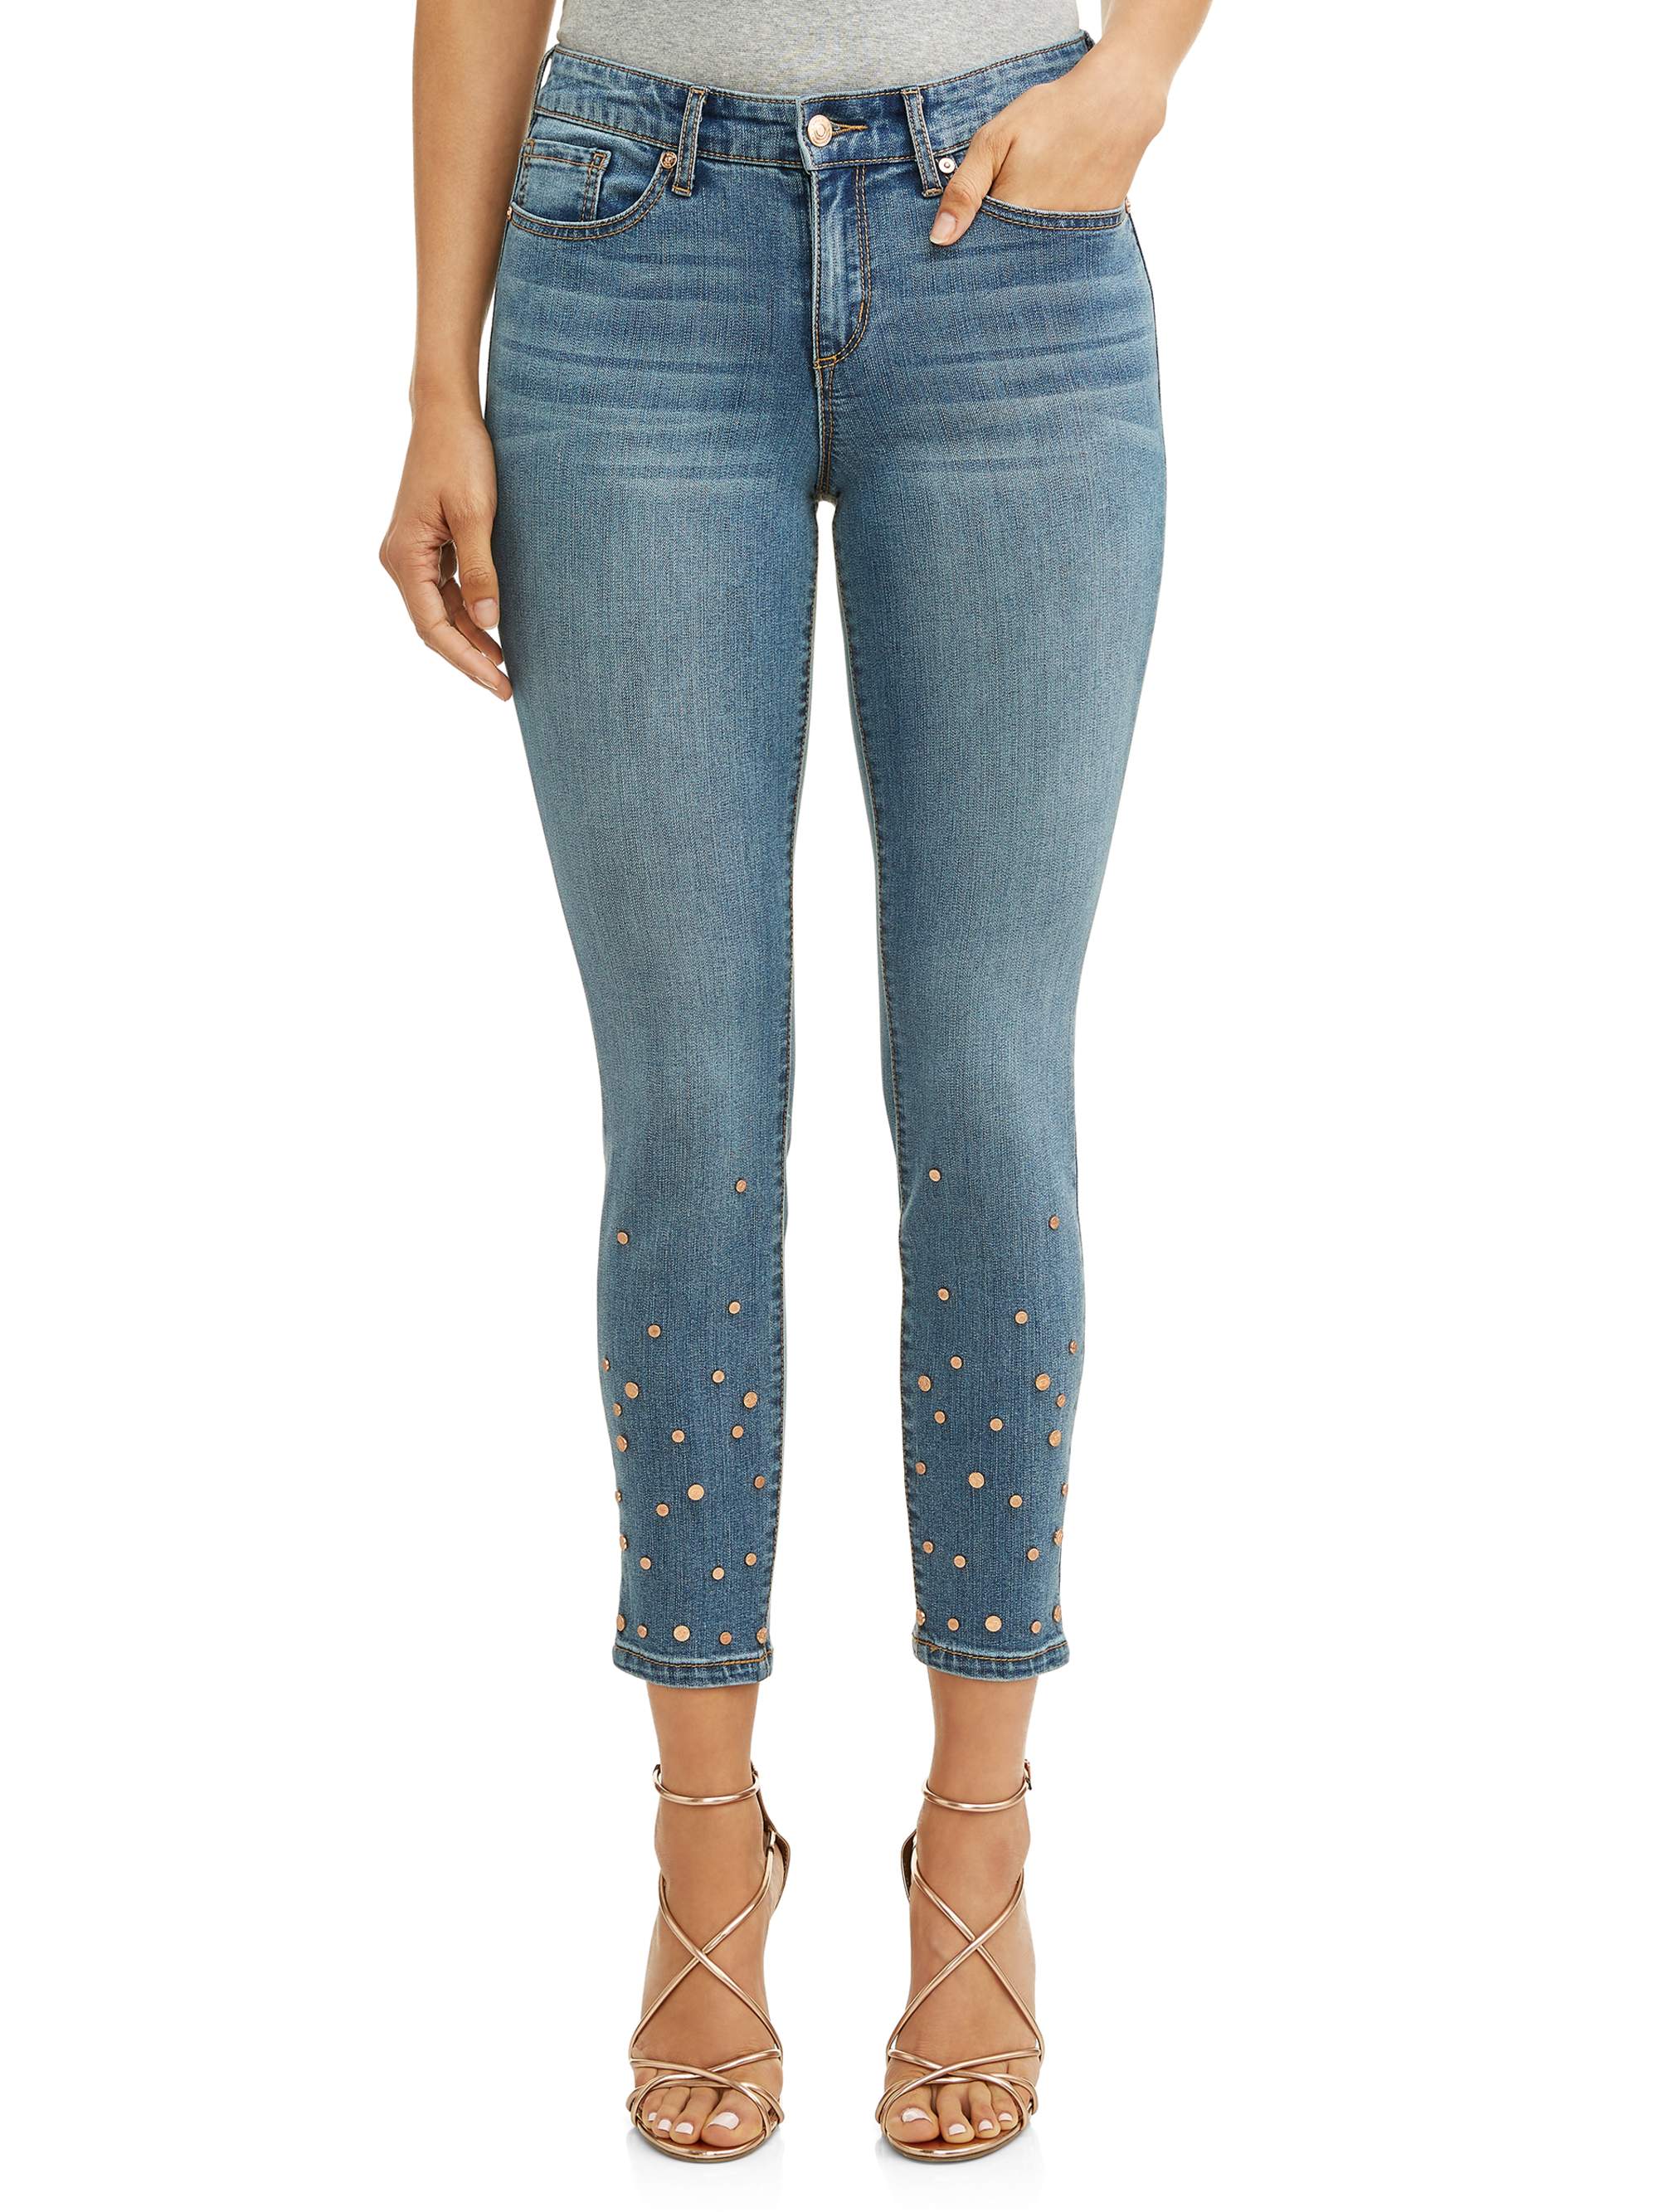 Sofia Jeans Skinny Studded Mid Rise Stretch Ankle Jean Women's - image 1 of 6